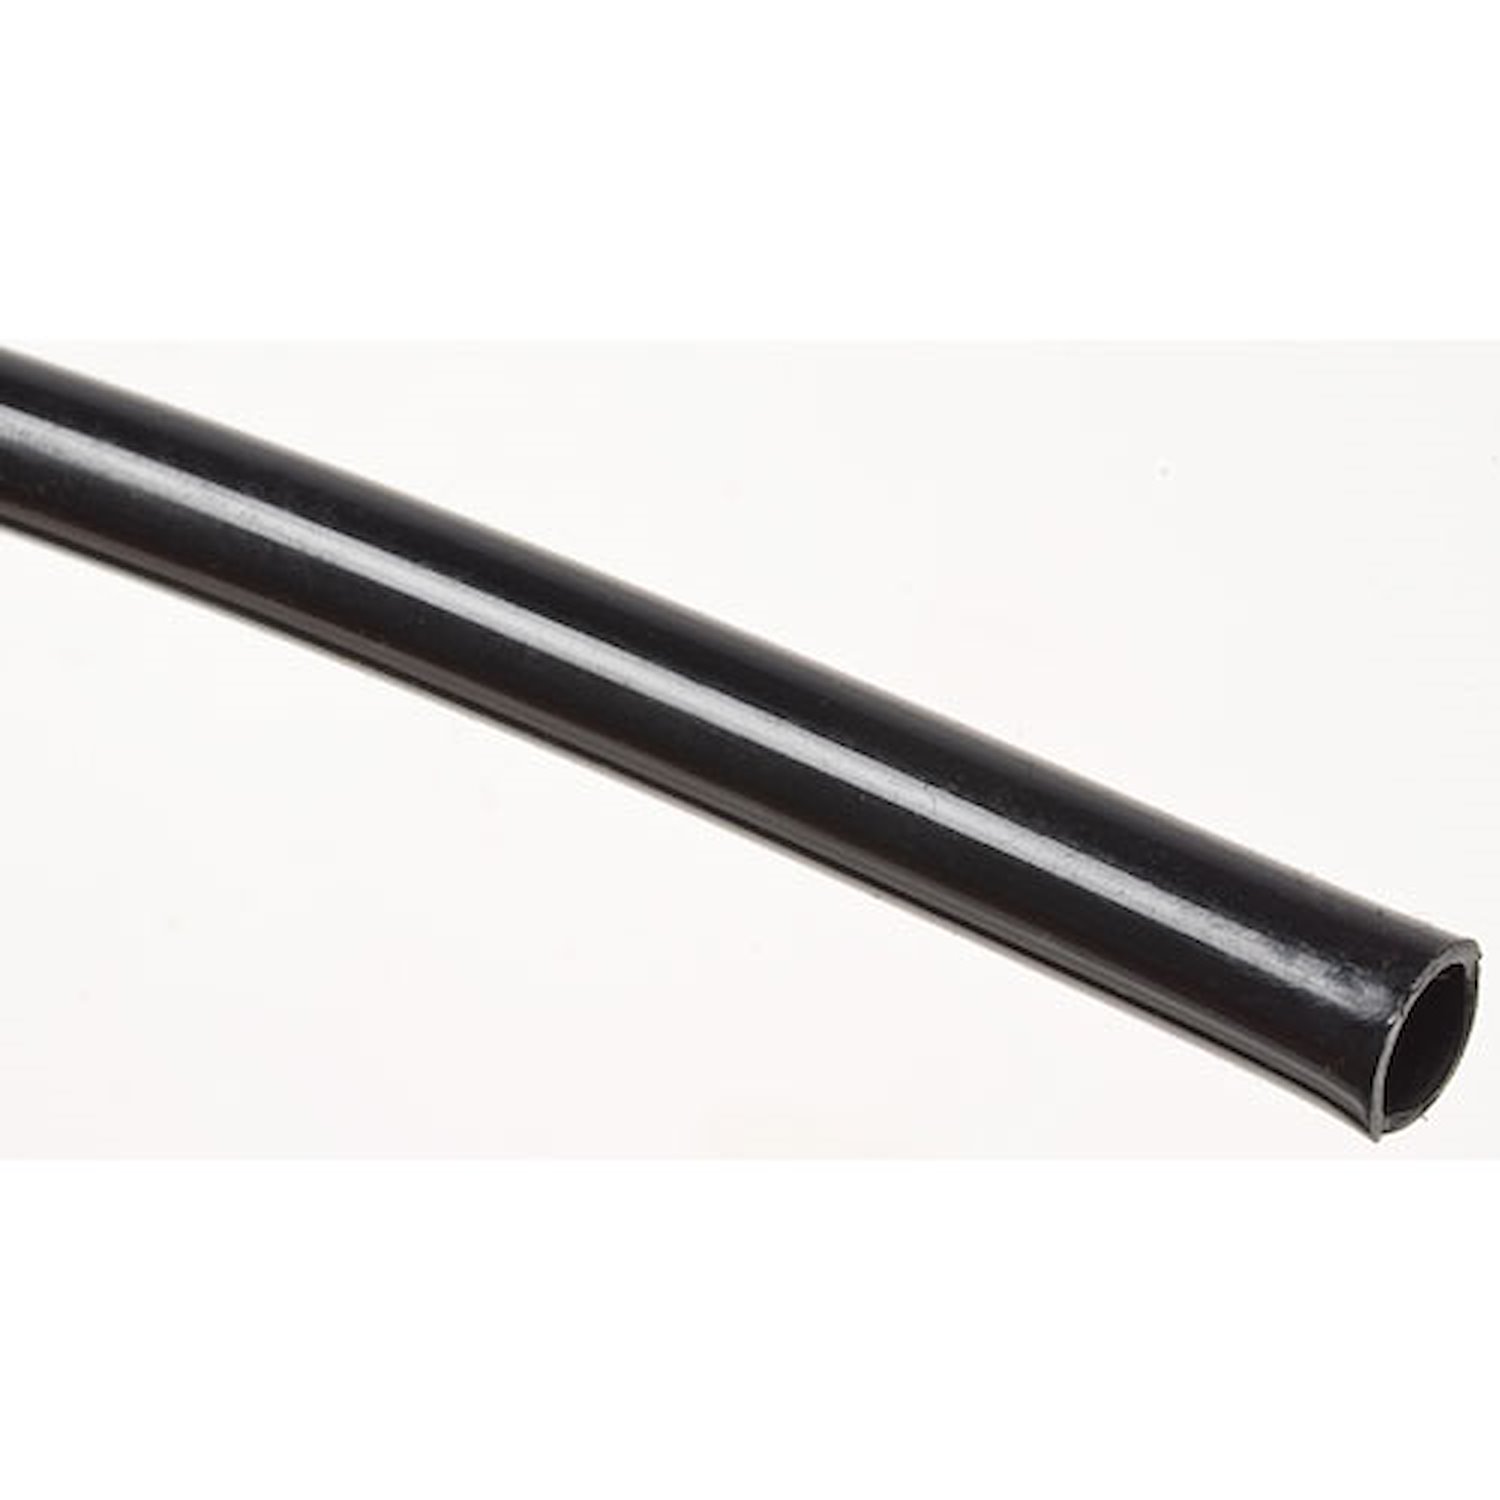 Nylon Fuel Injection Tubing [3/8 in. O.D. x 25 ft.]